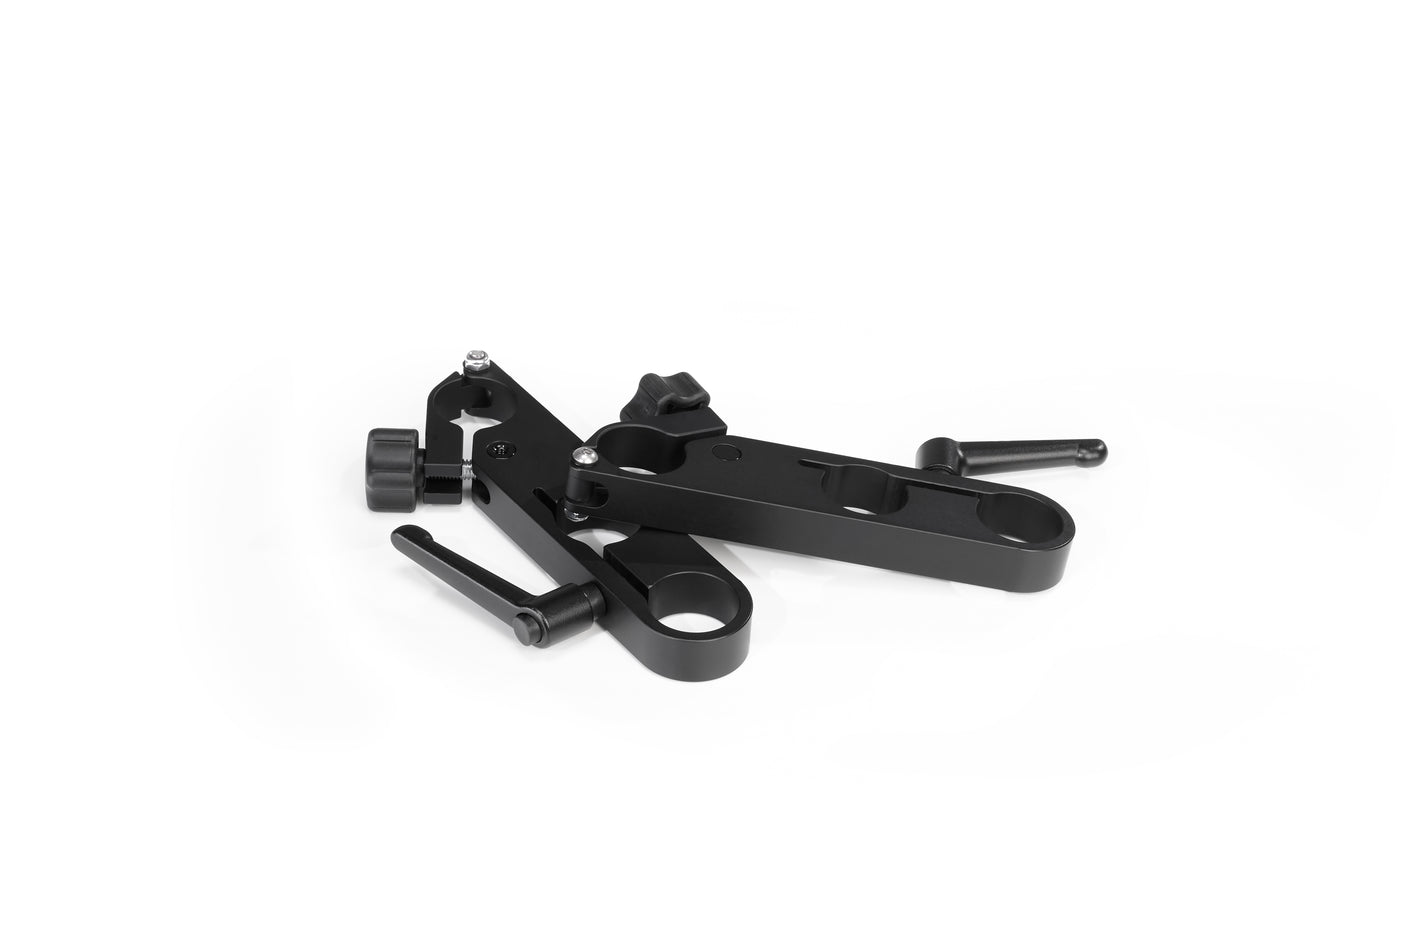 Monitor Arm Clamps for Monitors in Motion (Set of 2)